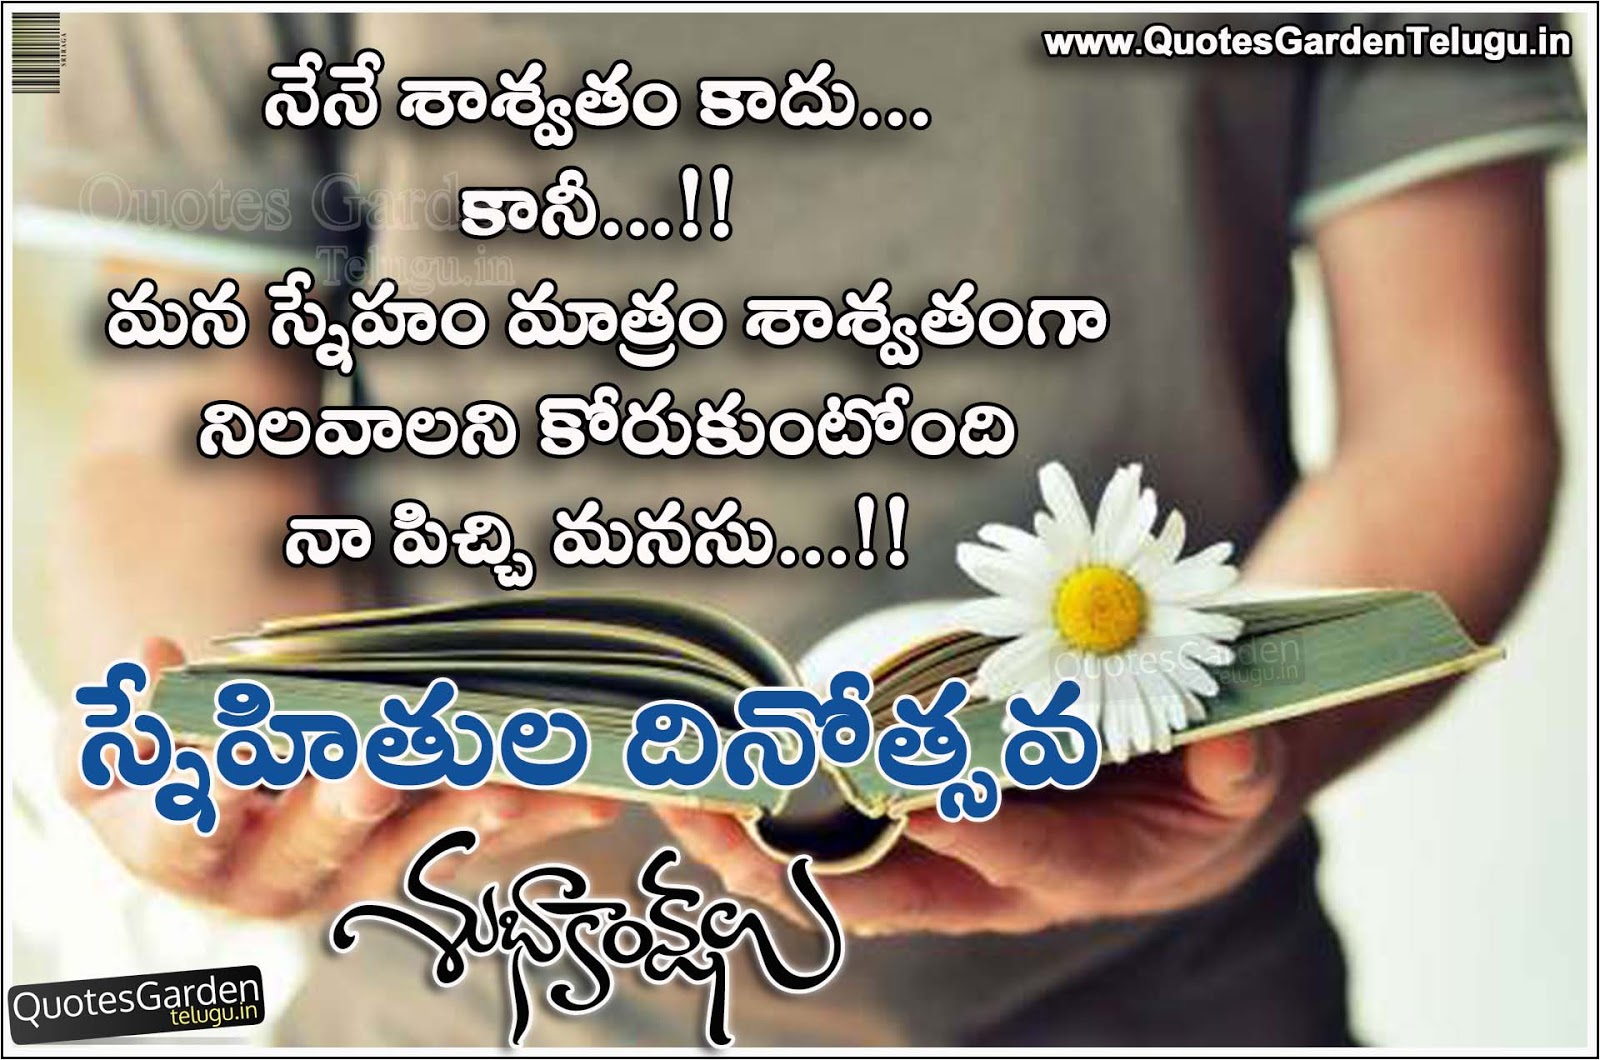 Telugu Friendship Day Greetings Quotations messages | QUOTES ...